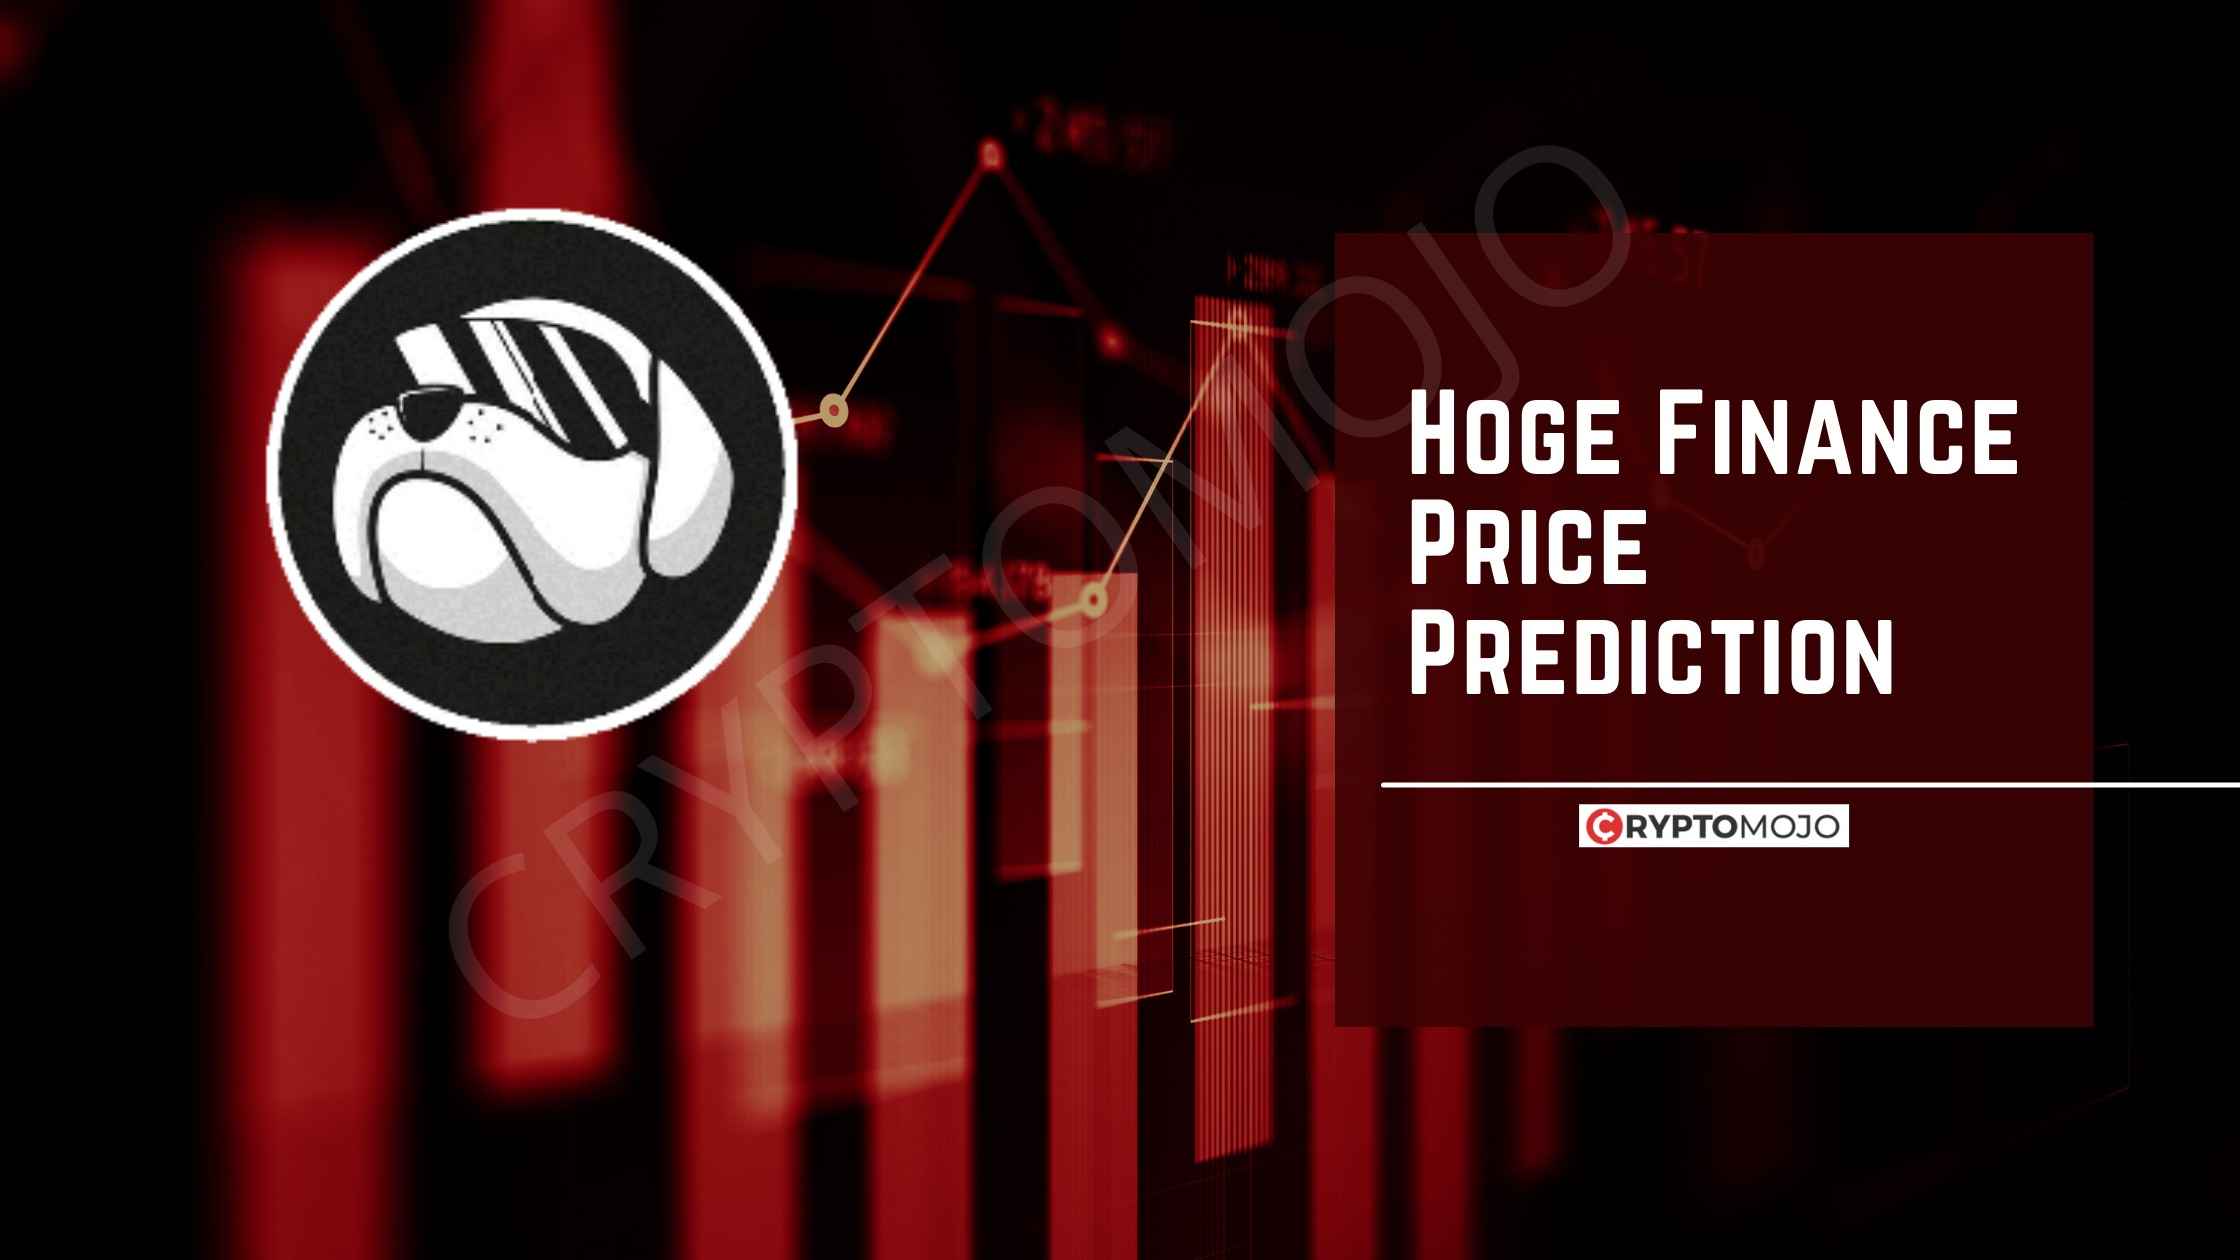 Hoge Finance Price Prediction- Is It The Best Cryptocurrency To Invest?